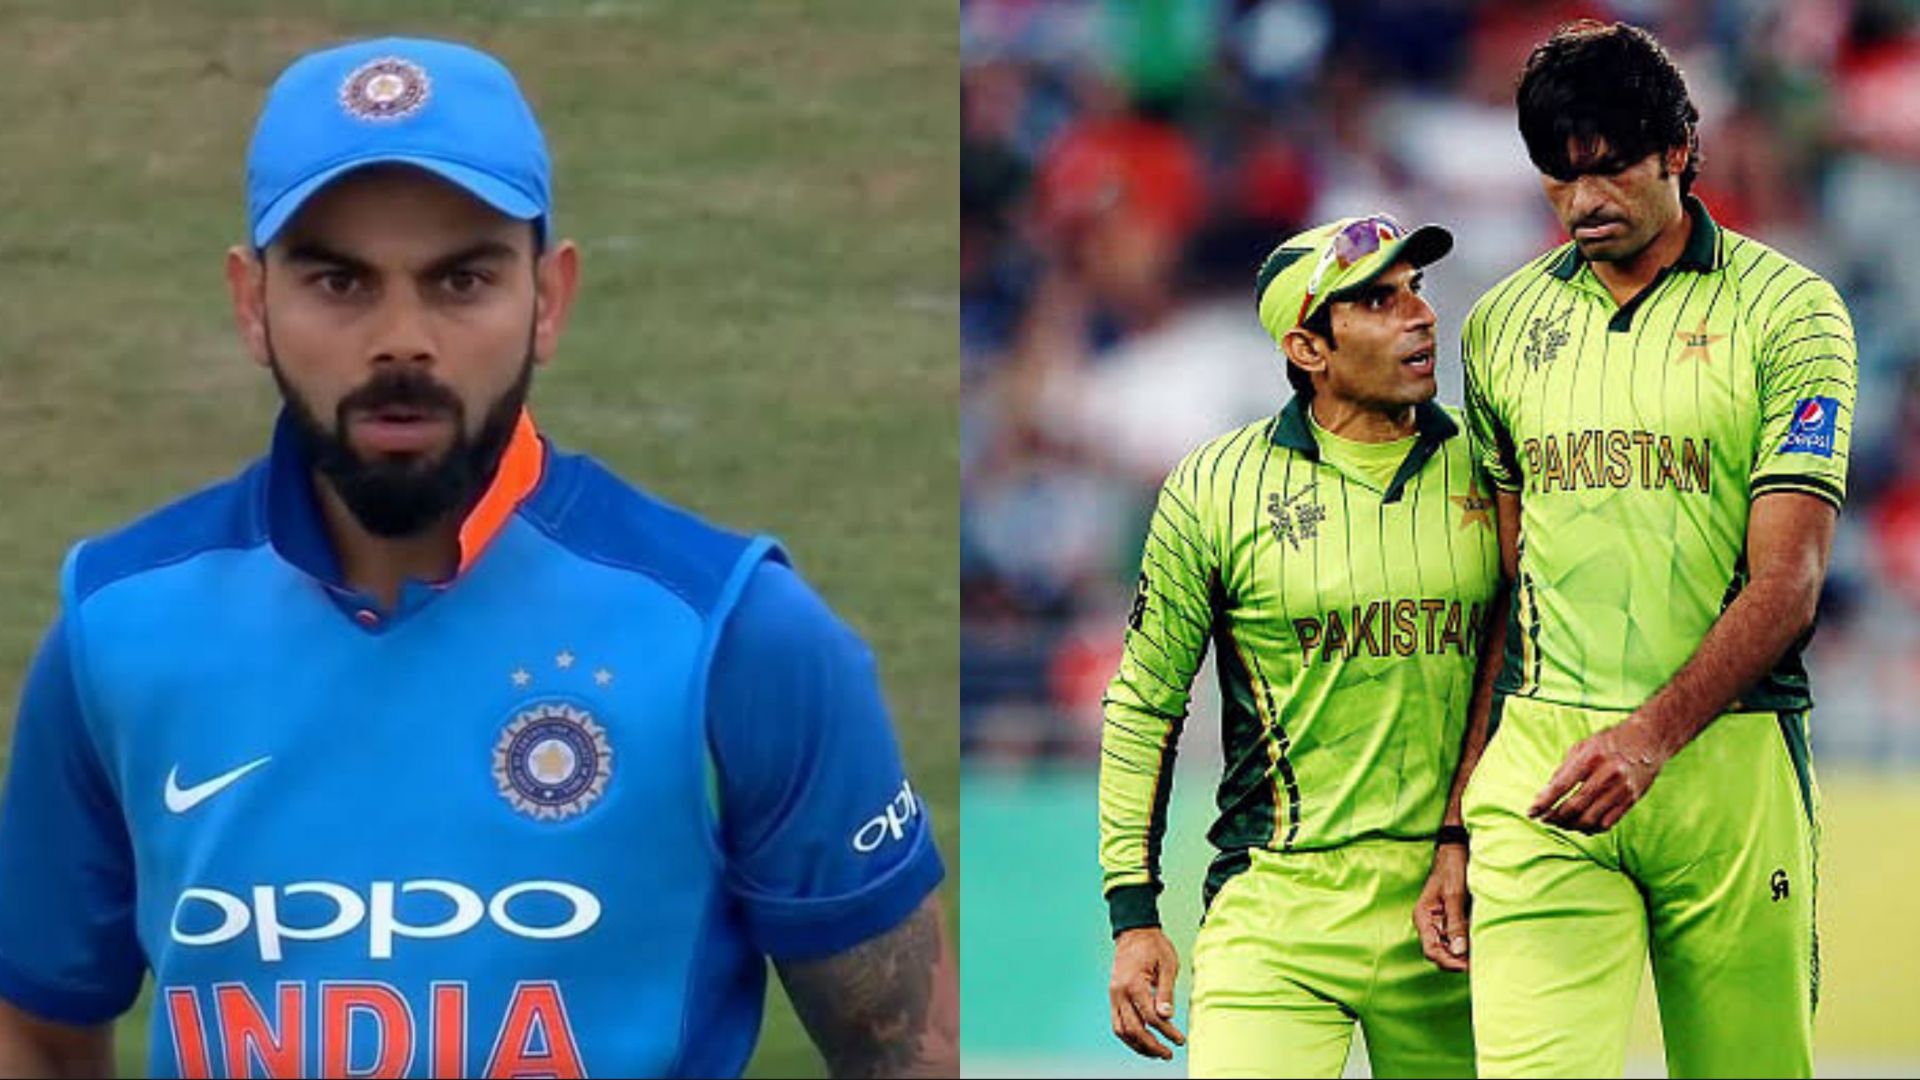 Mohammad Irfan left Virat Kohli surprised with his pace bowling in 2012/13